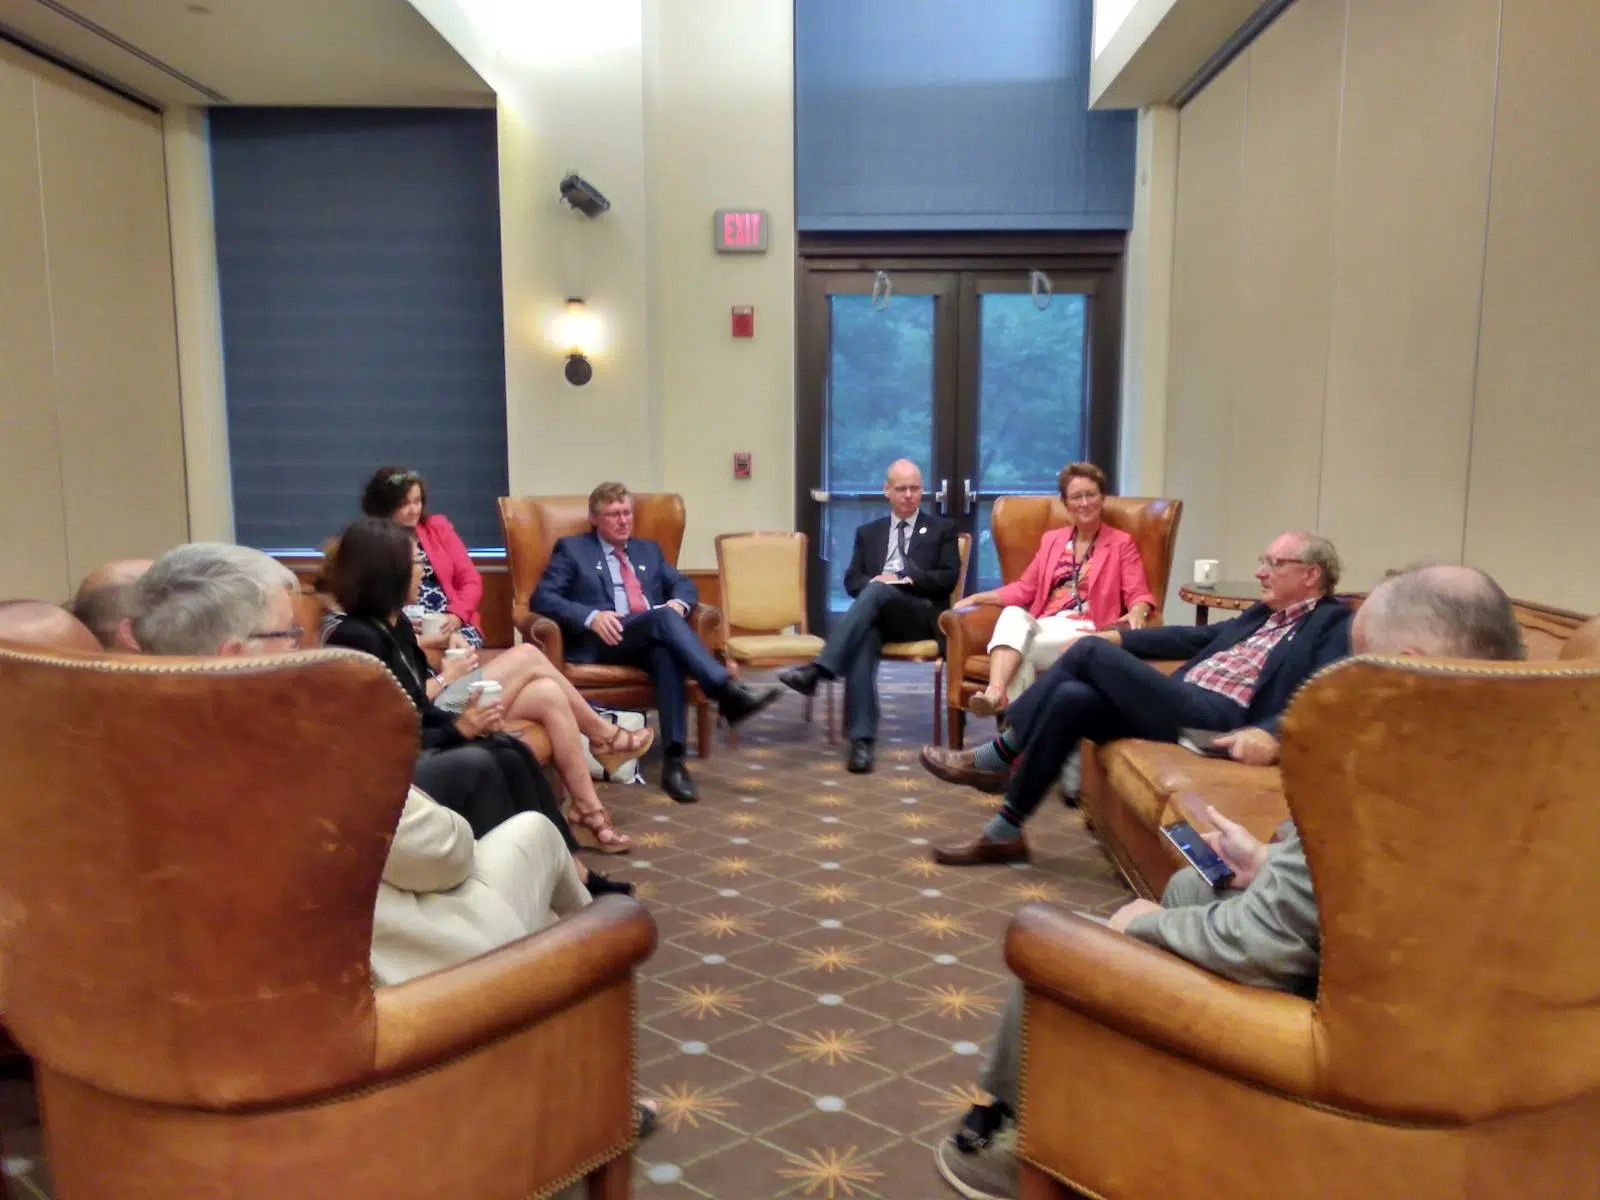 MacLauchlan meets with Premiers and Governors in Vermont